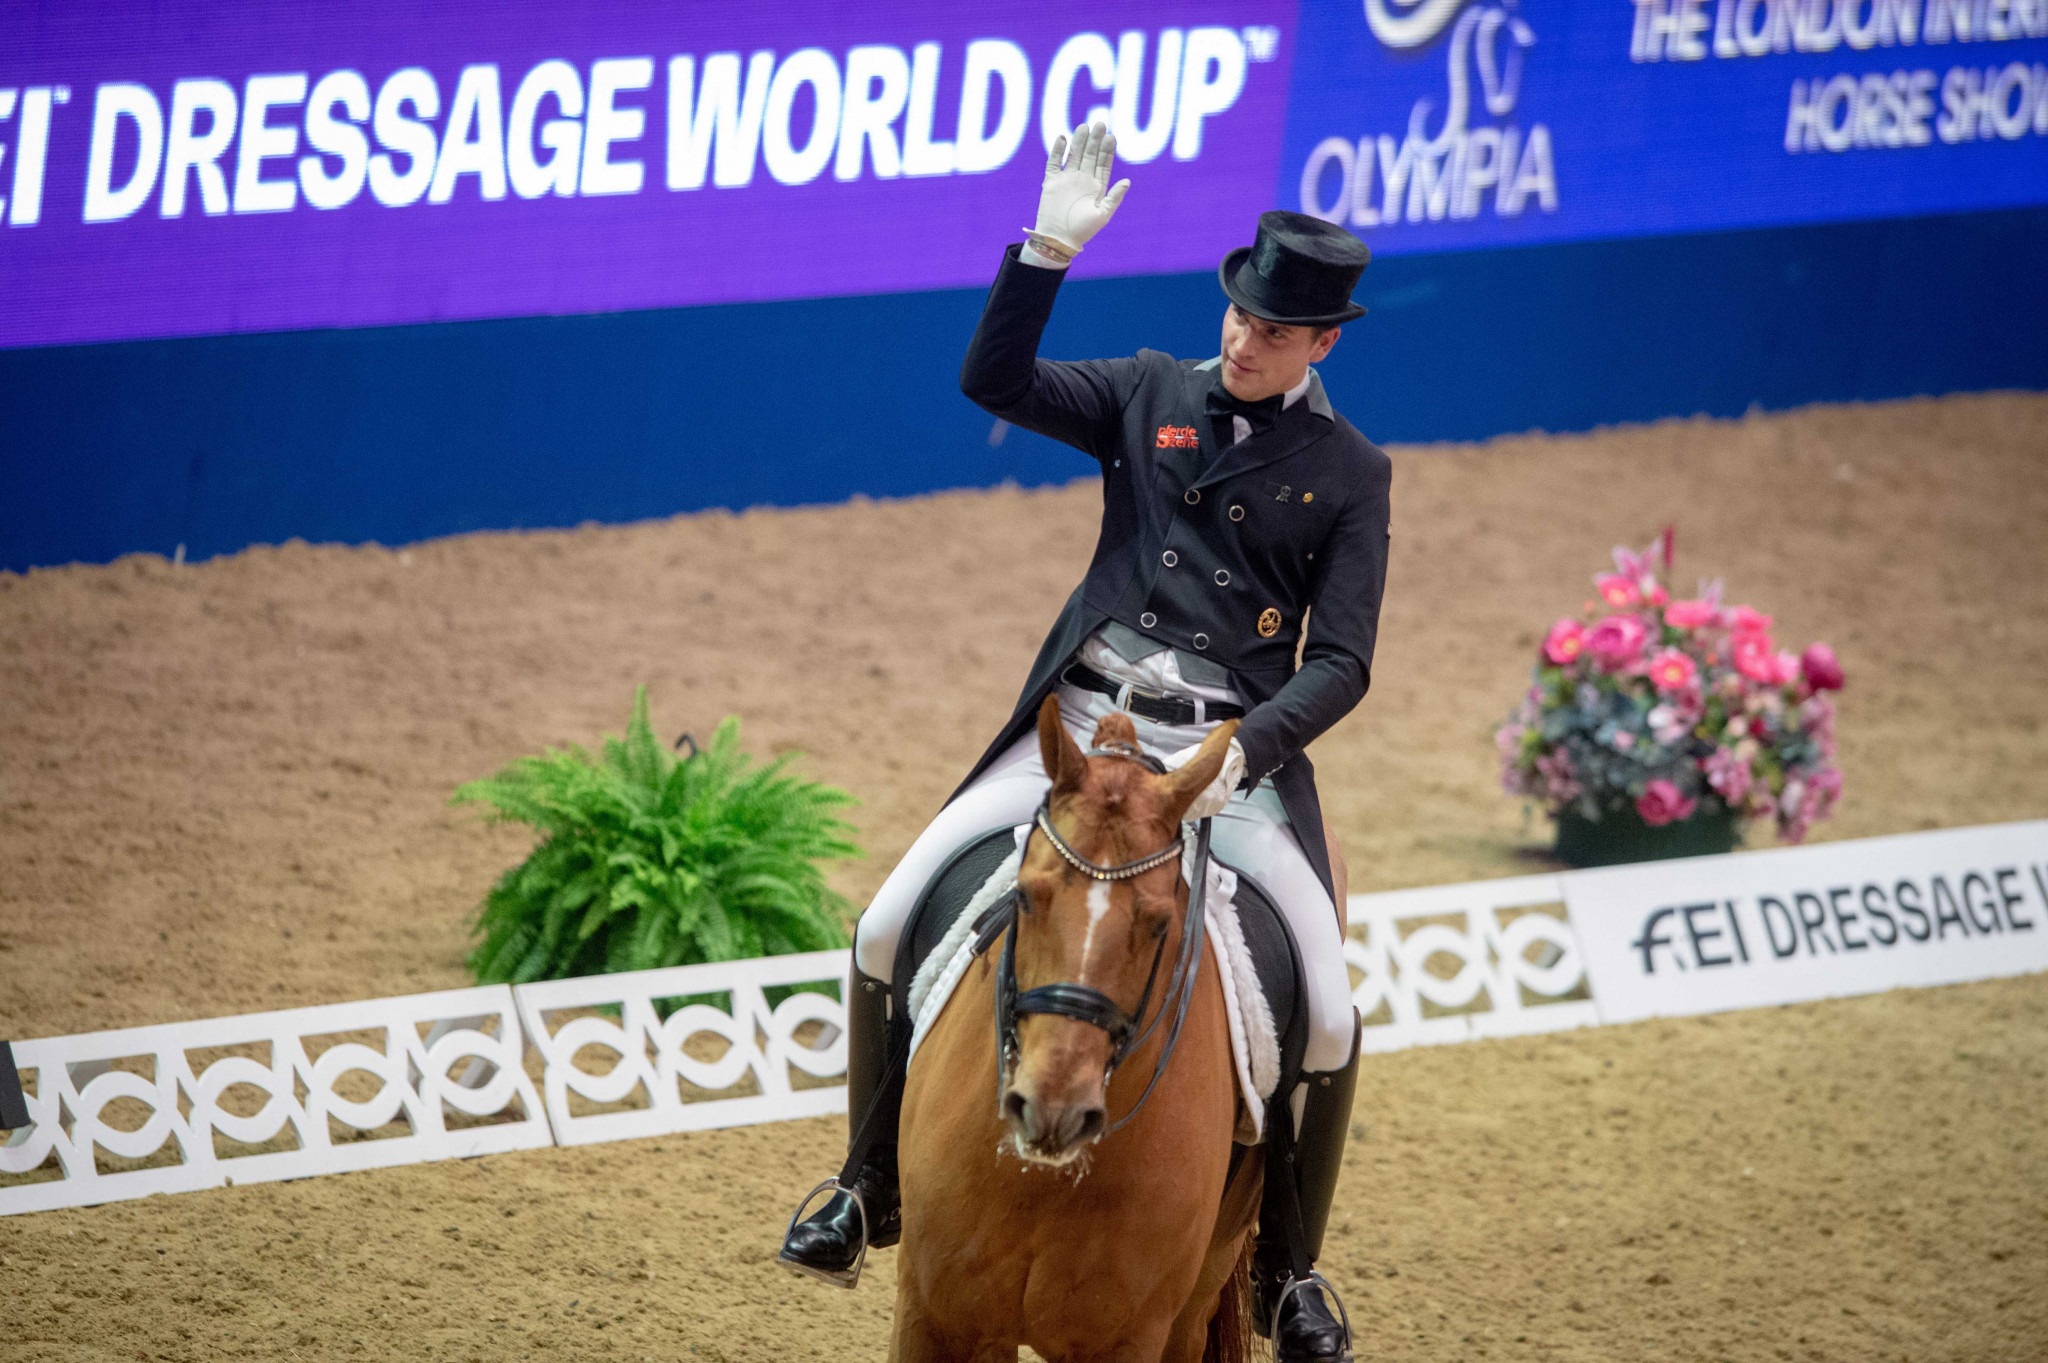 Wandres pips home hero Dujardin at Dressage World Cup in London